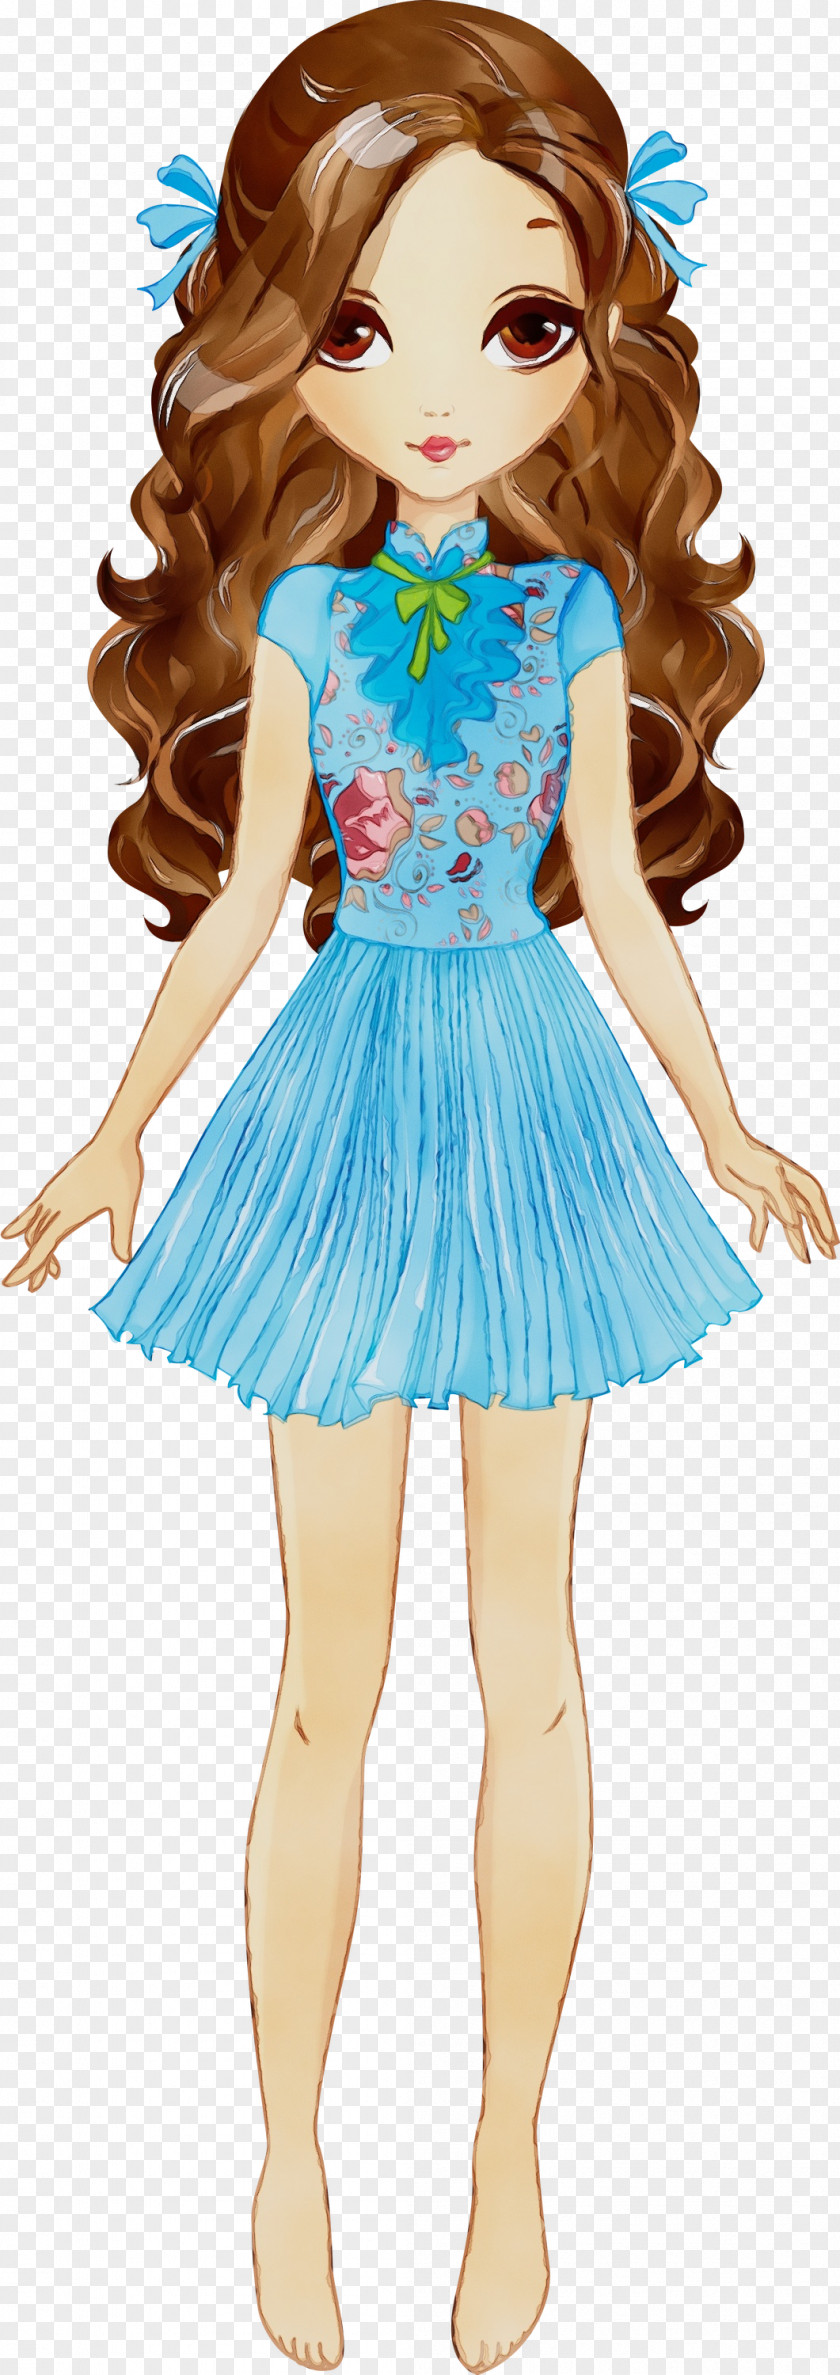 Style Fictional Character Girl Cartoon PNG